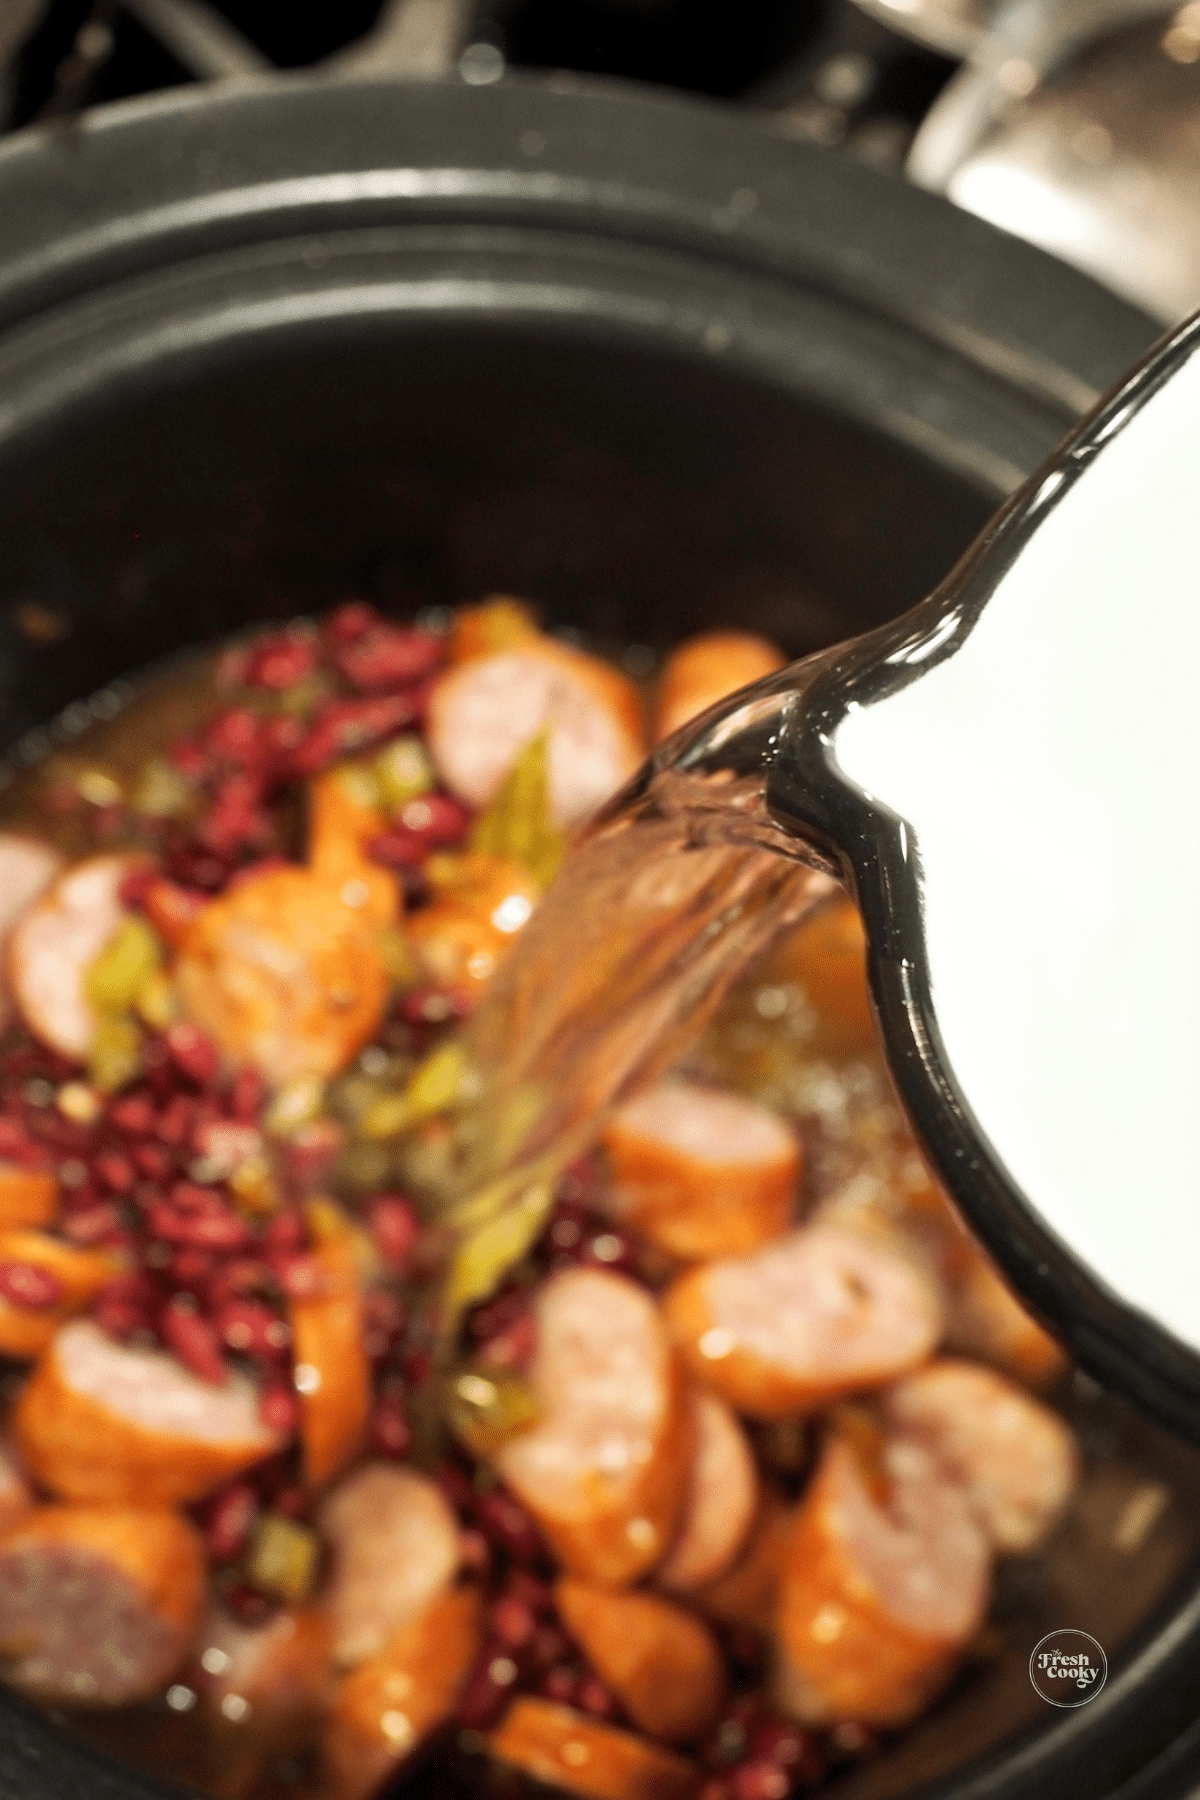 https://www.thefreshcooky.com/wp-content/uploads/2020/02/adding-water-to-slow-cooker-for-red-beans-and-rice.png